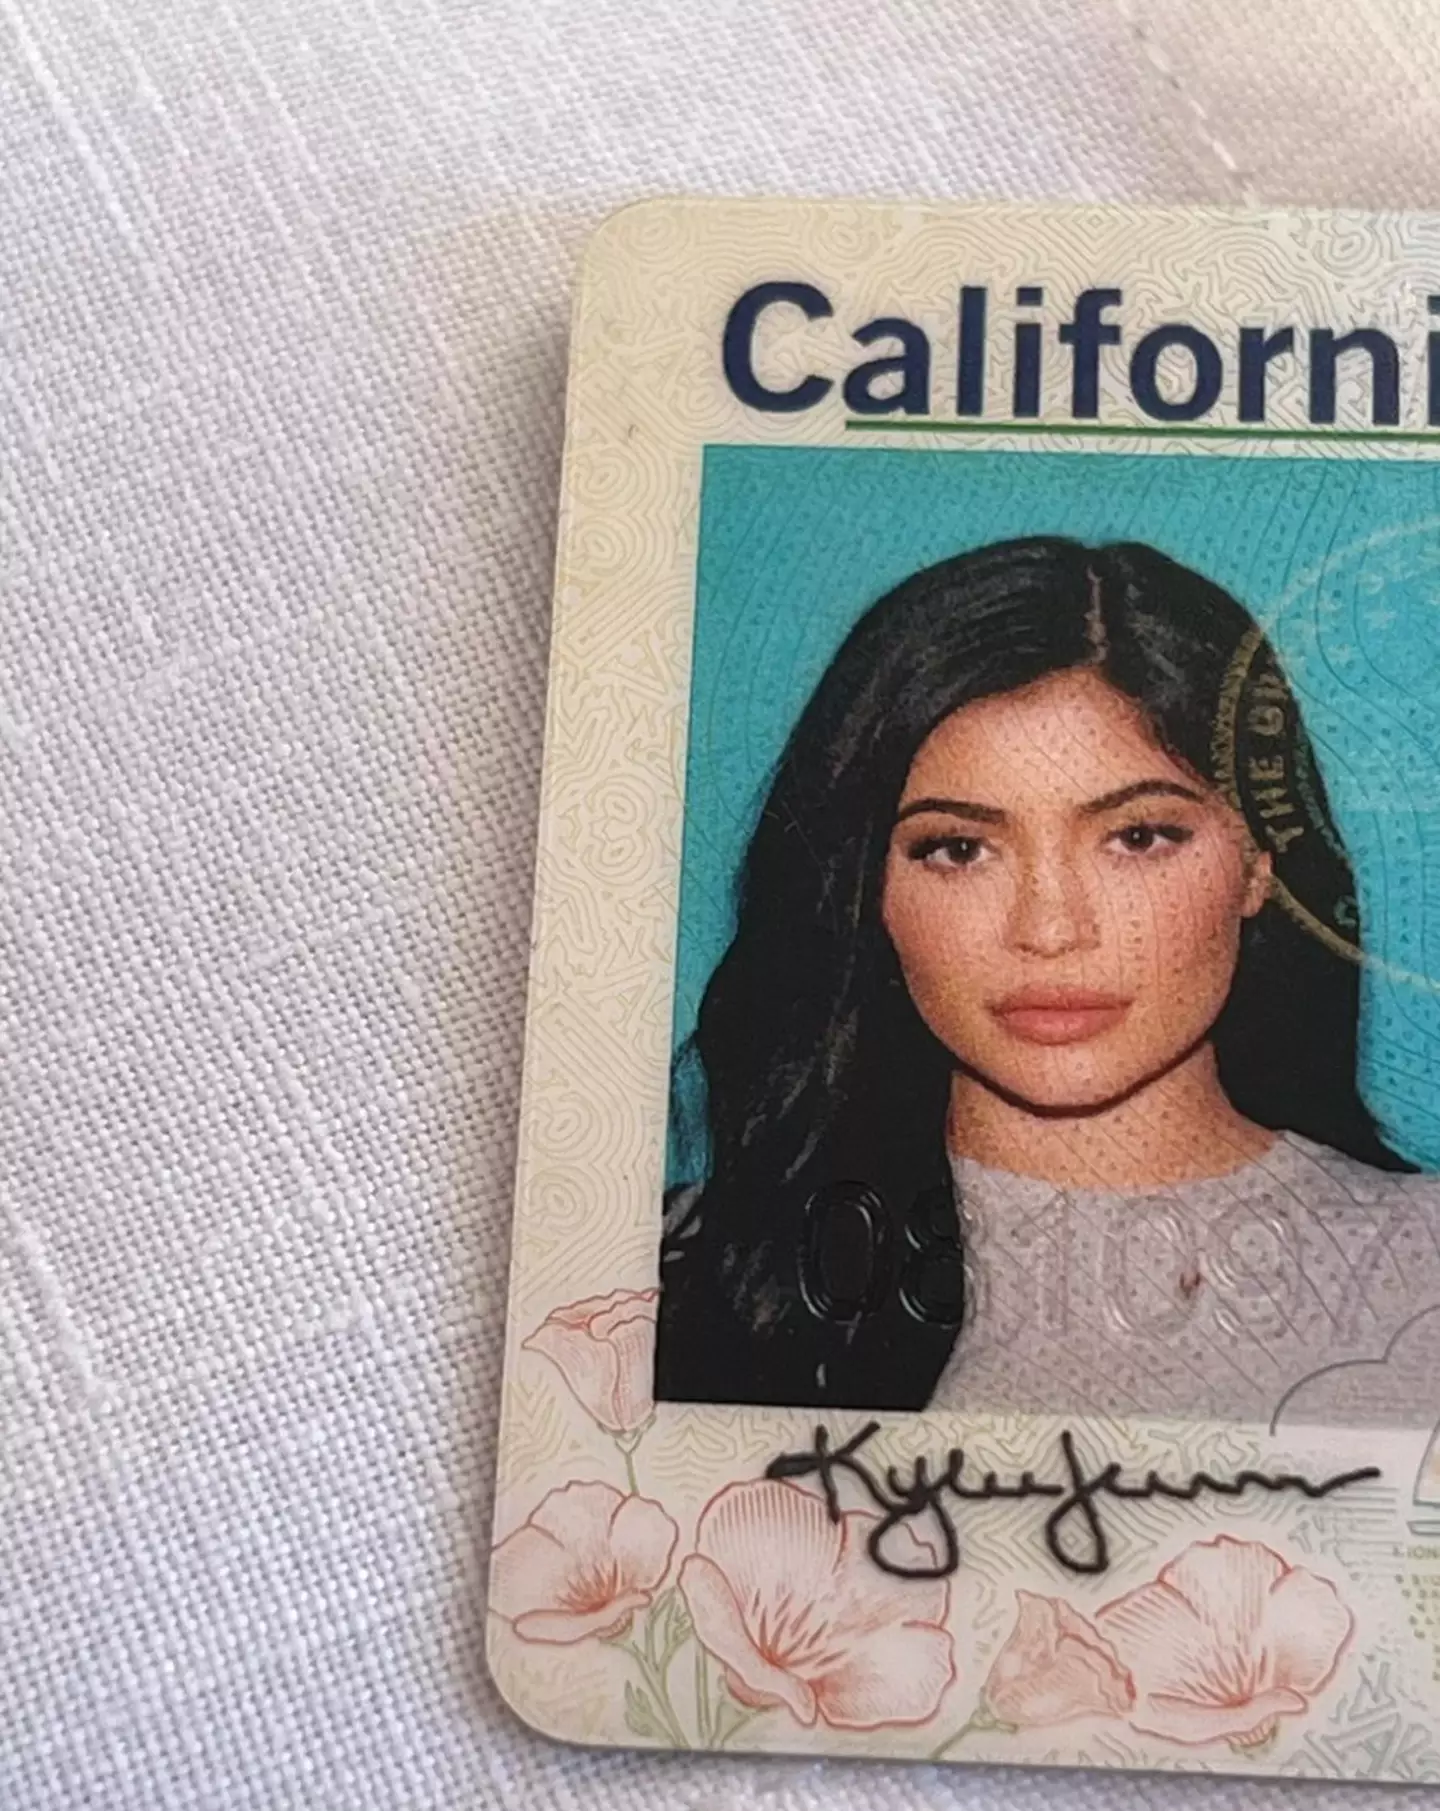 Kylie Jenner shared a picture of her driver's licence. (